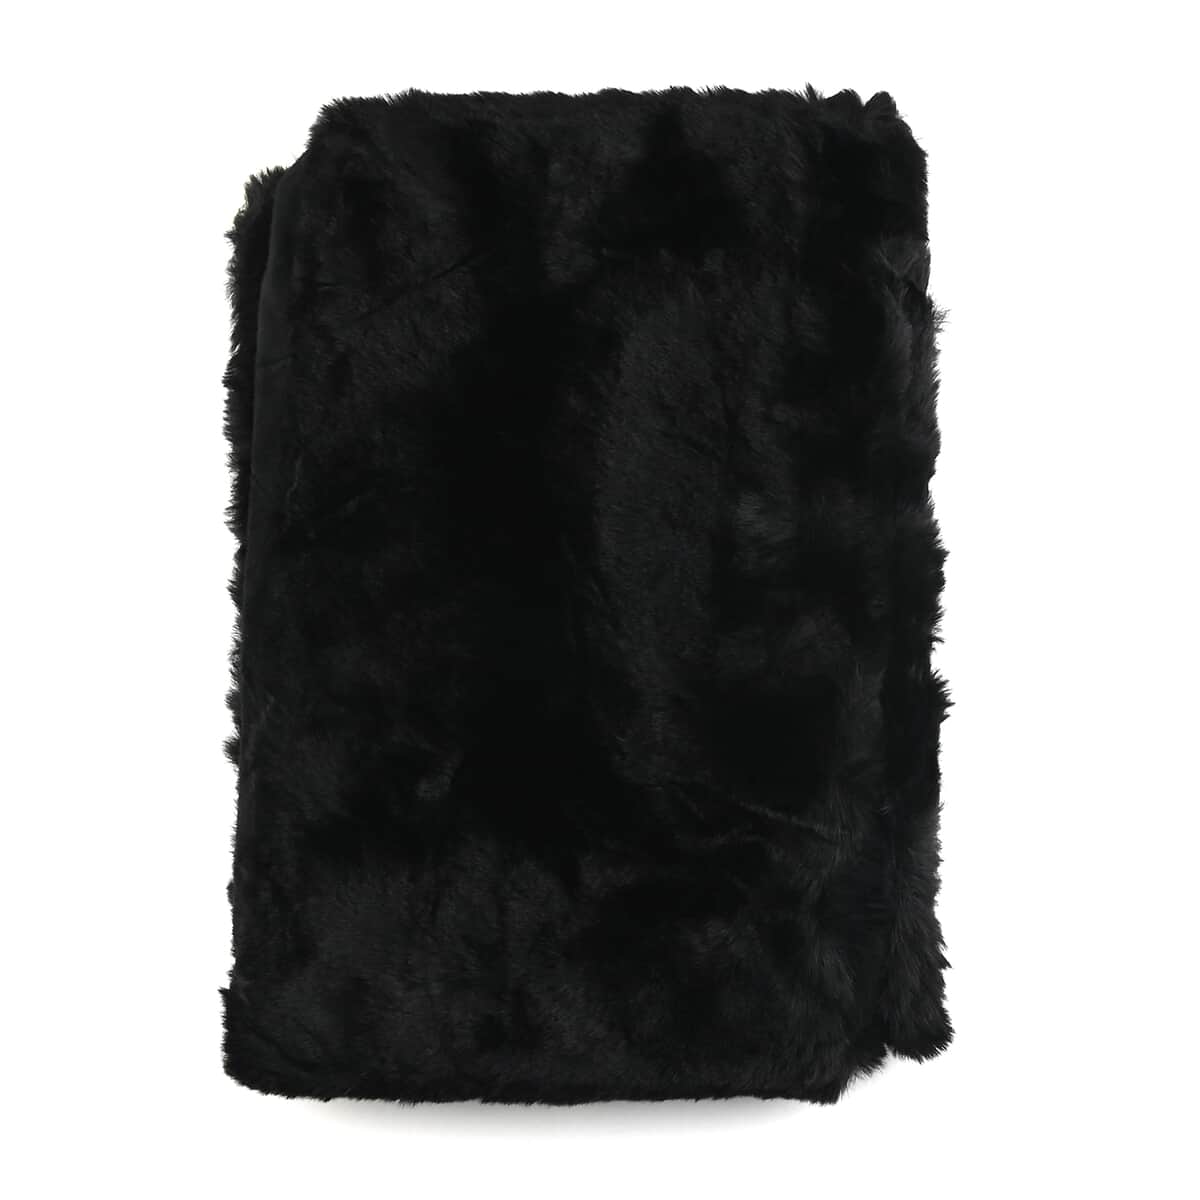 NYC CLOSEOUT Black Faux Fur Stole (72"x28") image number 0